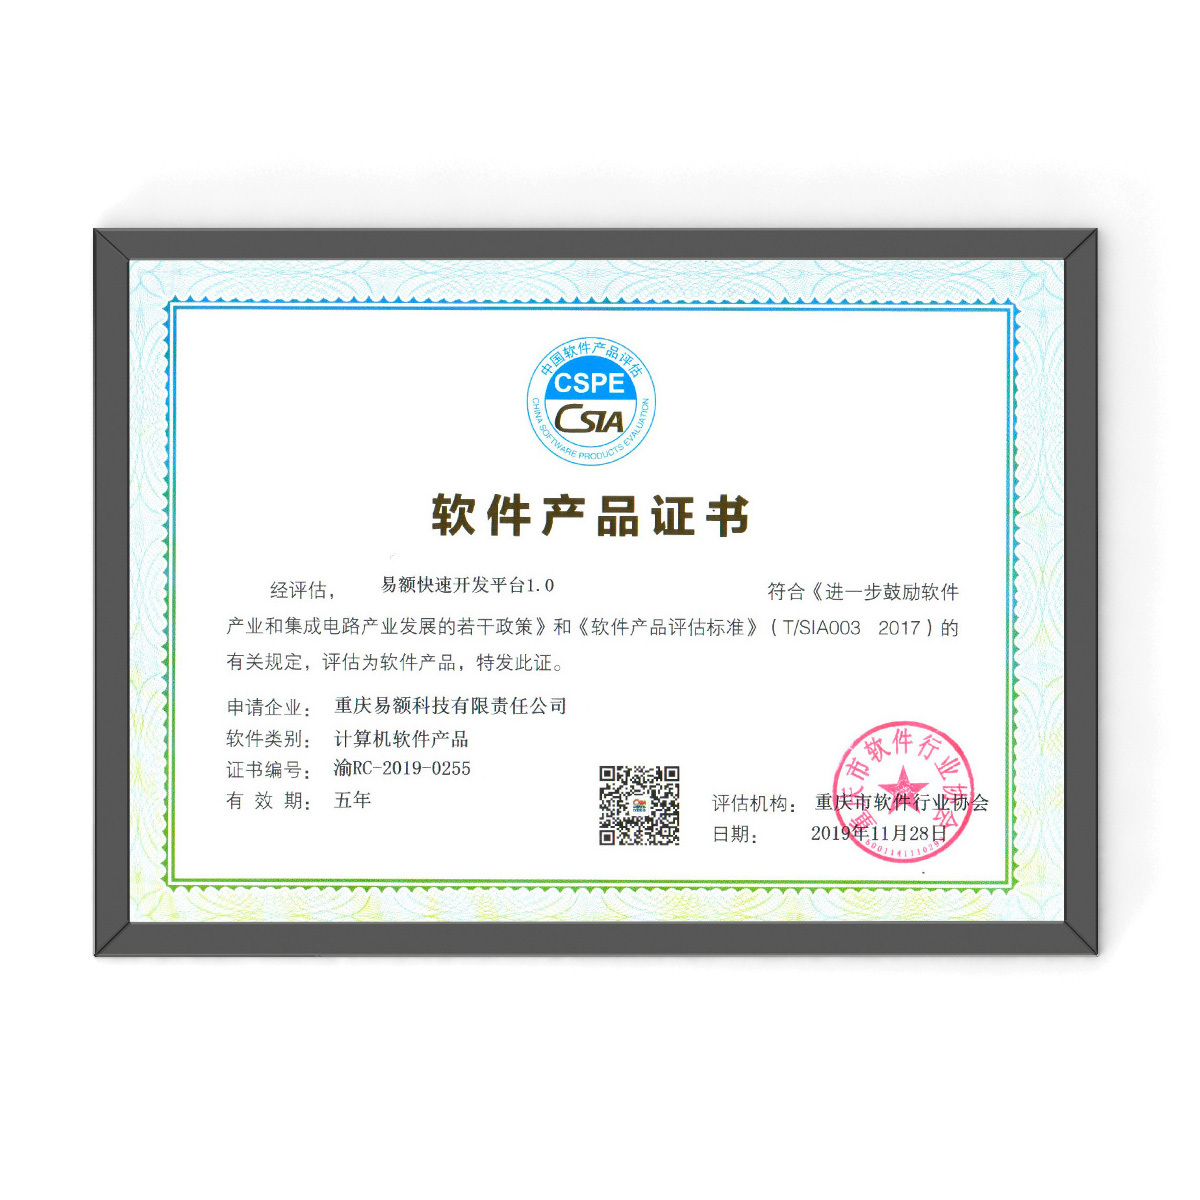 Software Product Certificate of YIE Technology